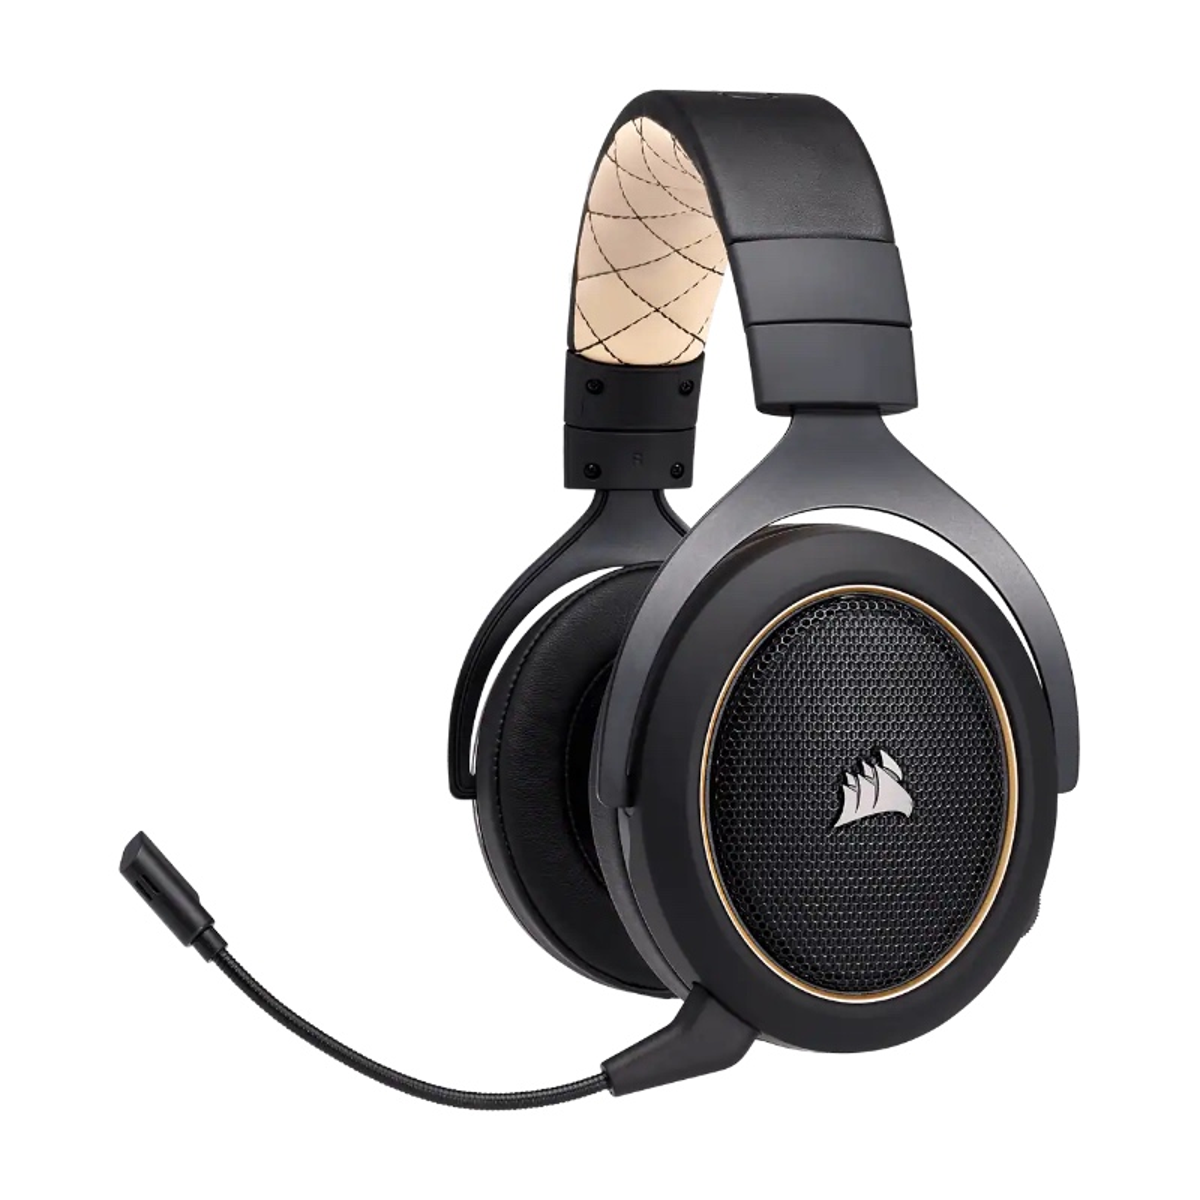 Rendezvous Plantkunde Seraph Corsair's HS70 Pro wireless gaming headset is nearly half price at Currys |  Eurogamer.net